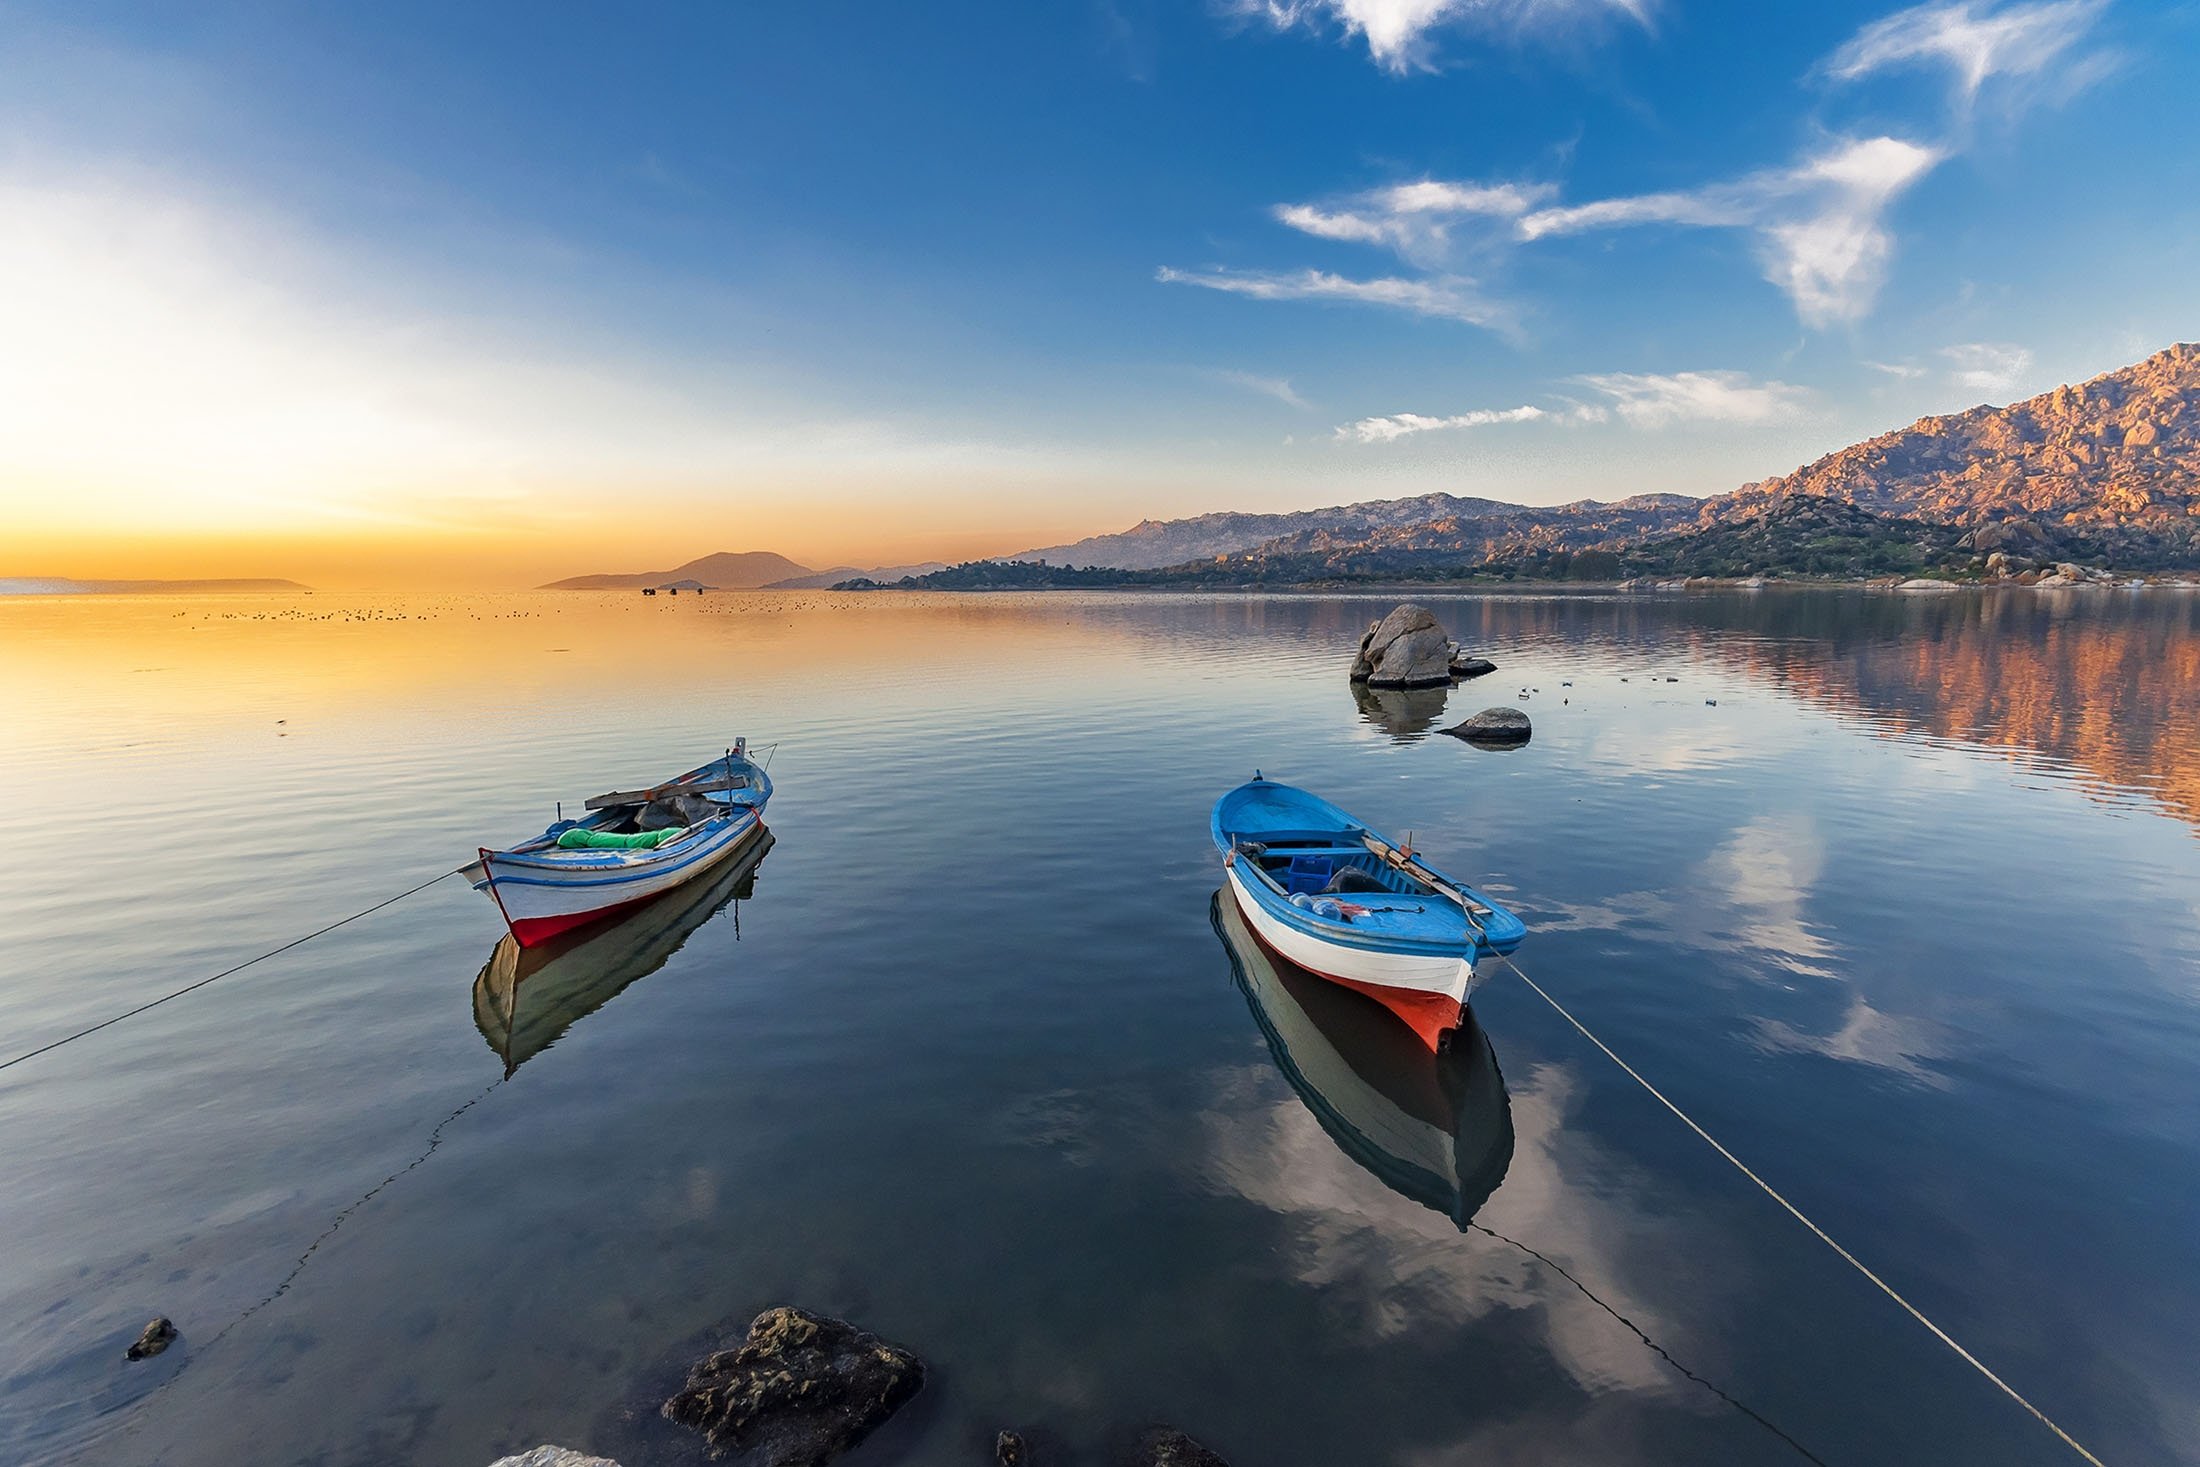 Located near Milas in Muğla and visible from the main highway, Bafa Lake is a sublime slice of nature with a tropical feel and the plants and birds that enhance it. (Shutterstock Photo)